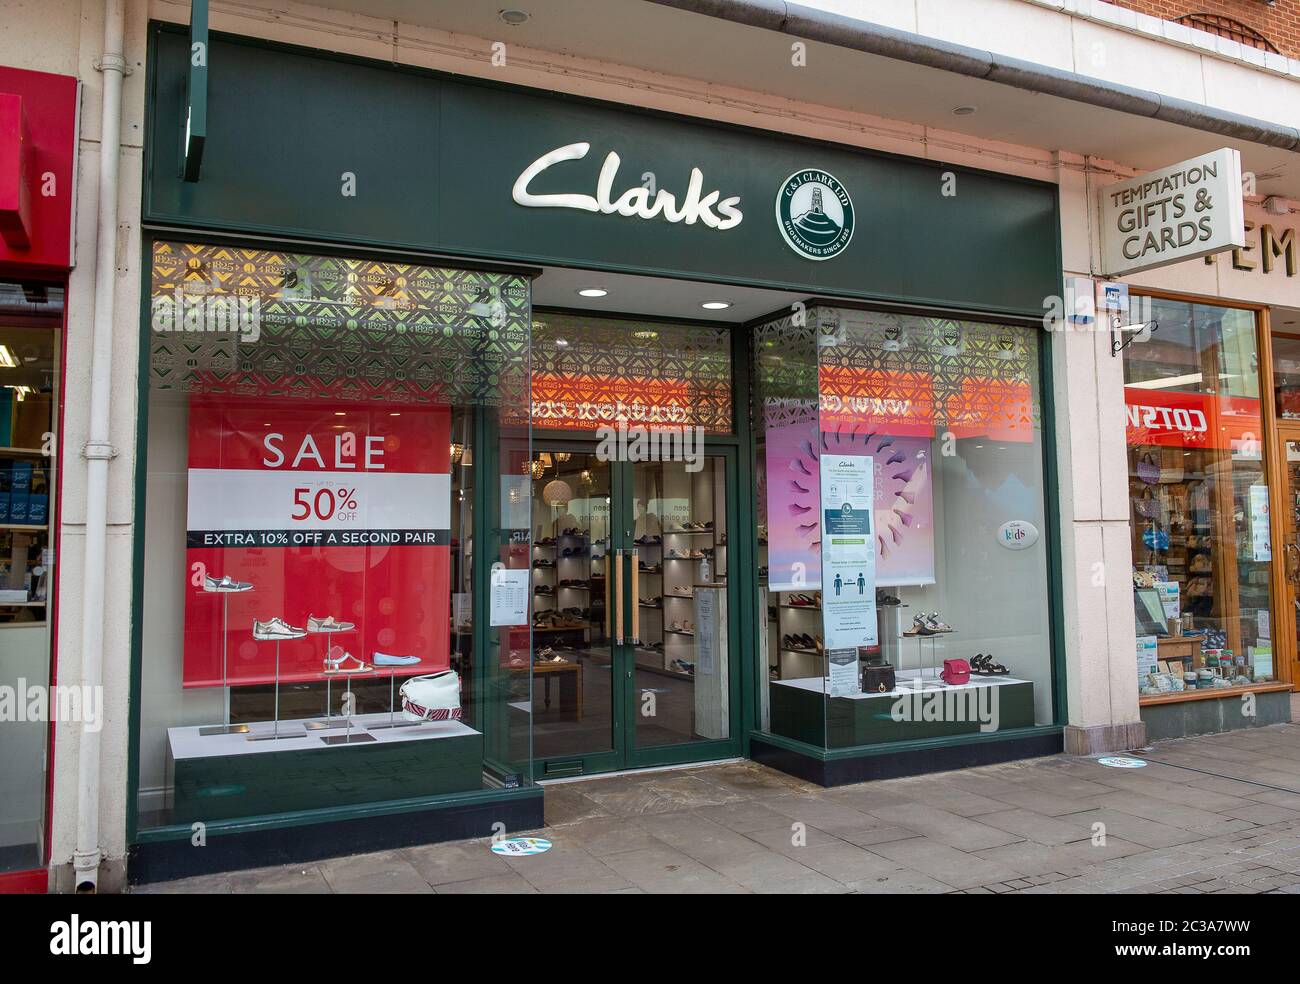 elephant and castle clarks outlet